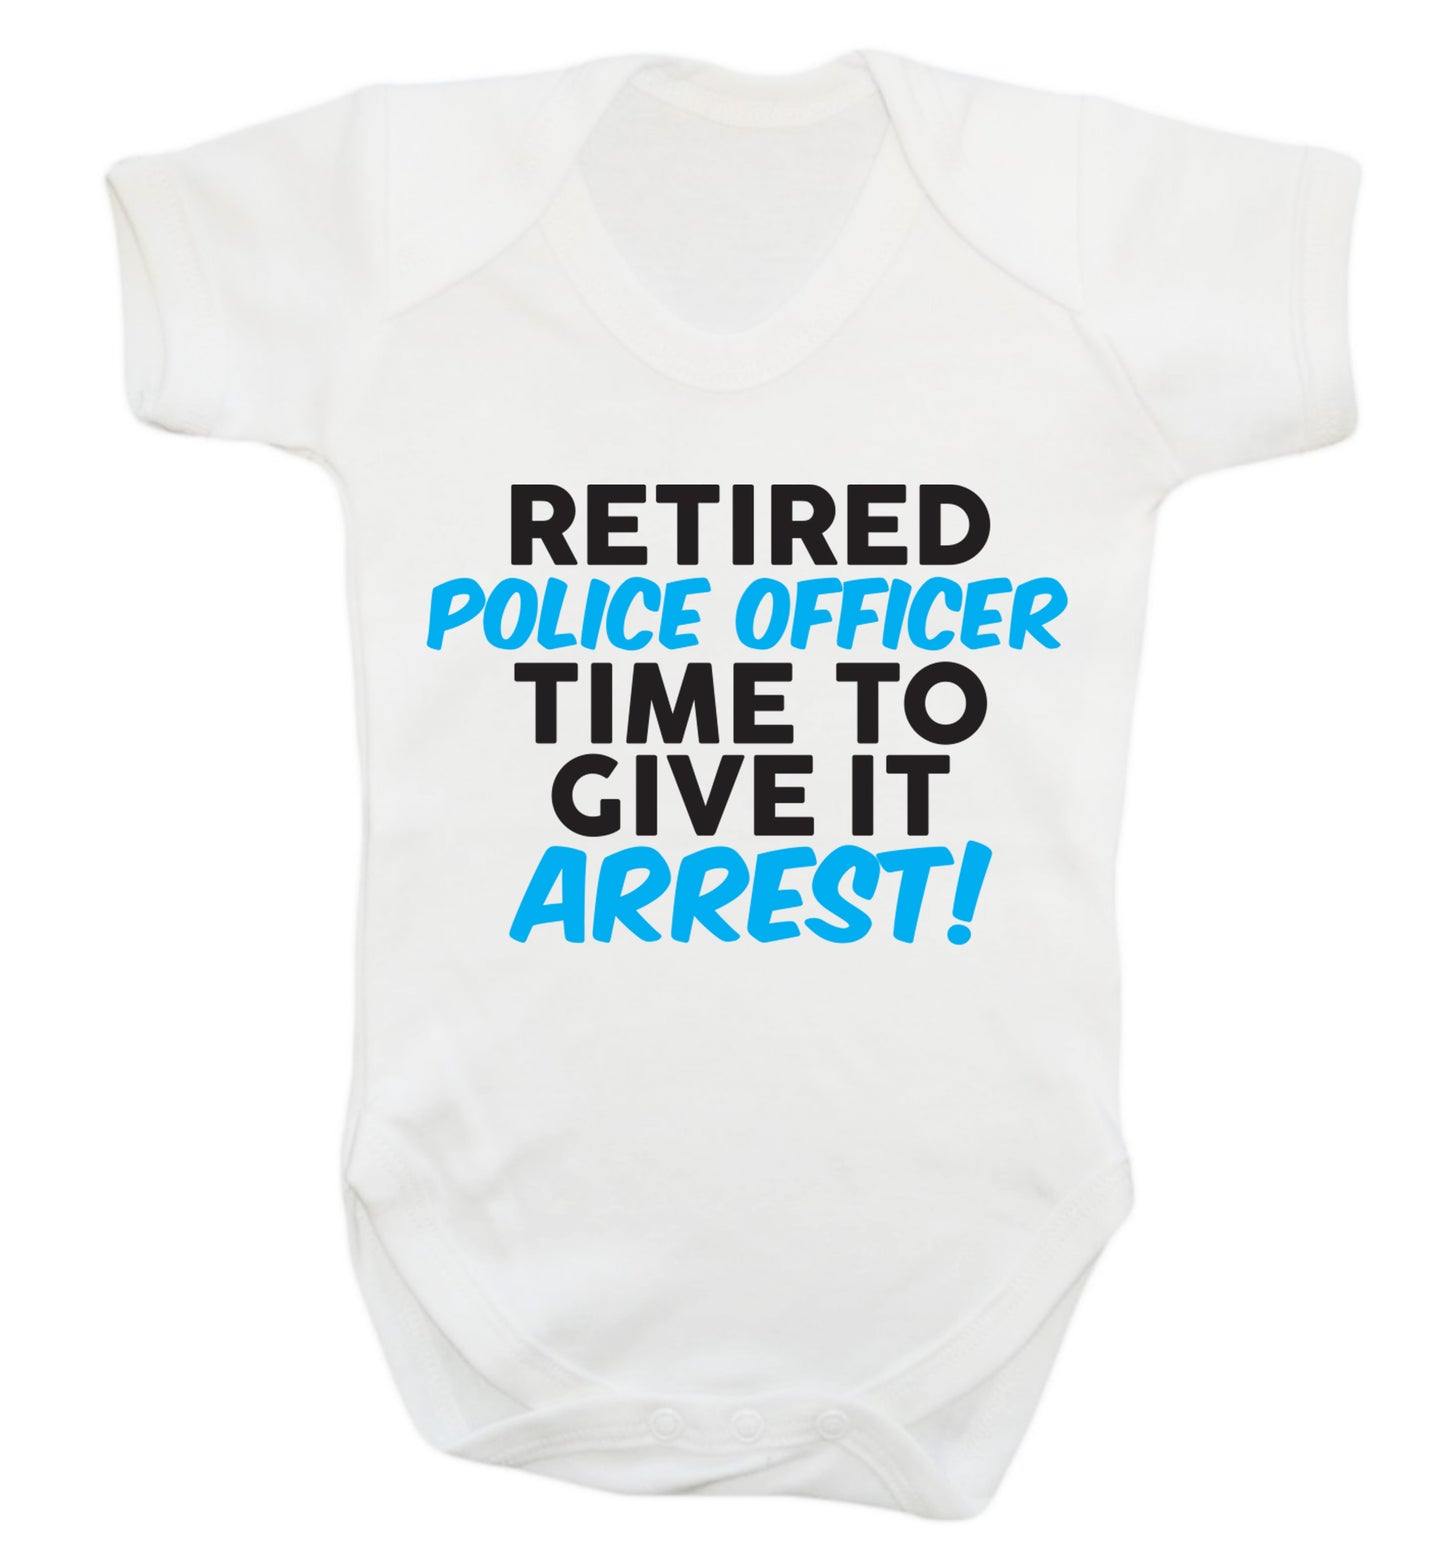 Retired police officer time to give it arrest Baby Vest white 18-24 months